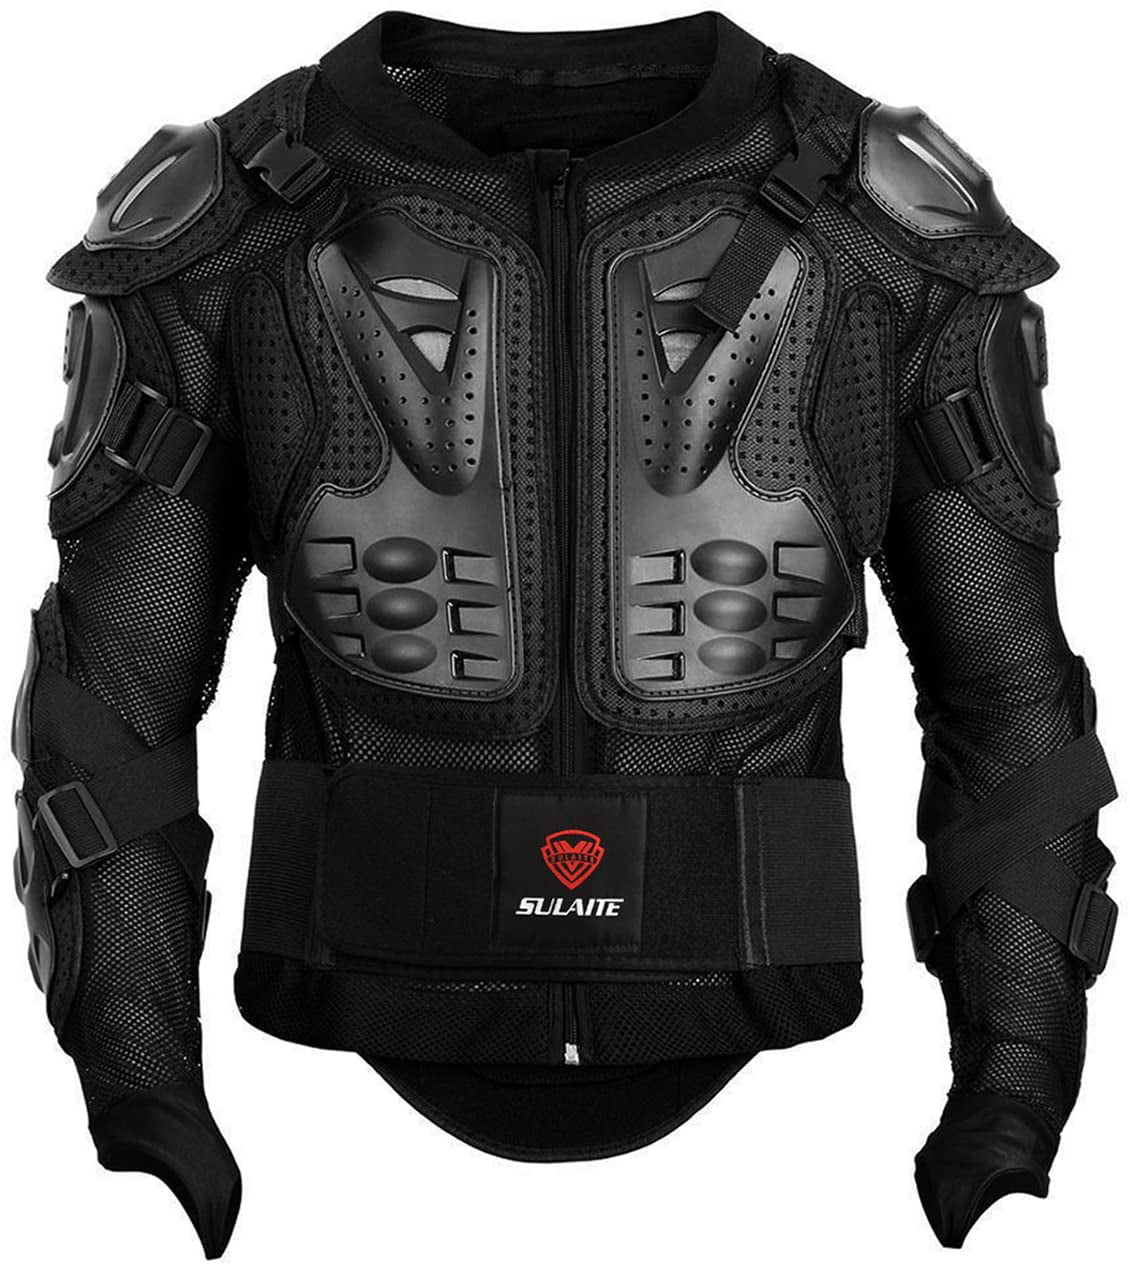 ADULT HORSE RIDING BODY PROTECTOR WITH ADJUSTABLE SIDE LACES SMALL TO X-LARGE.N 